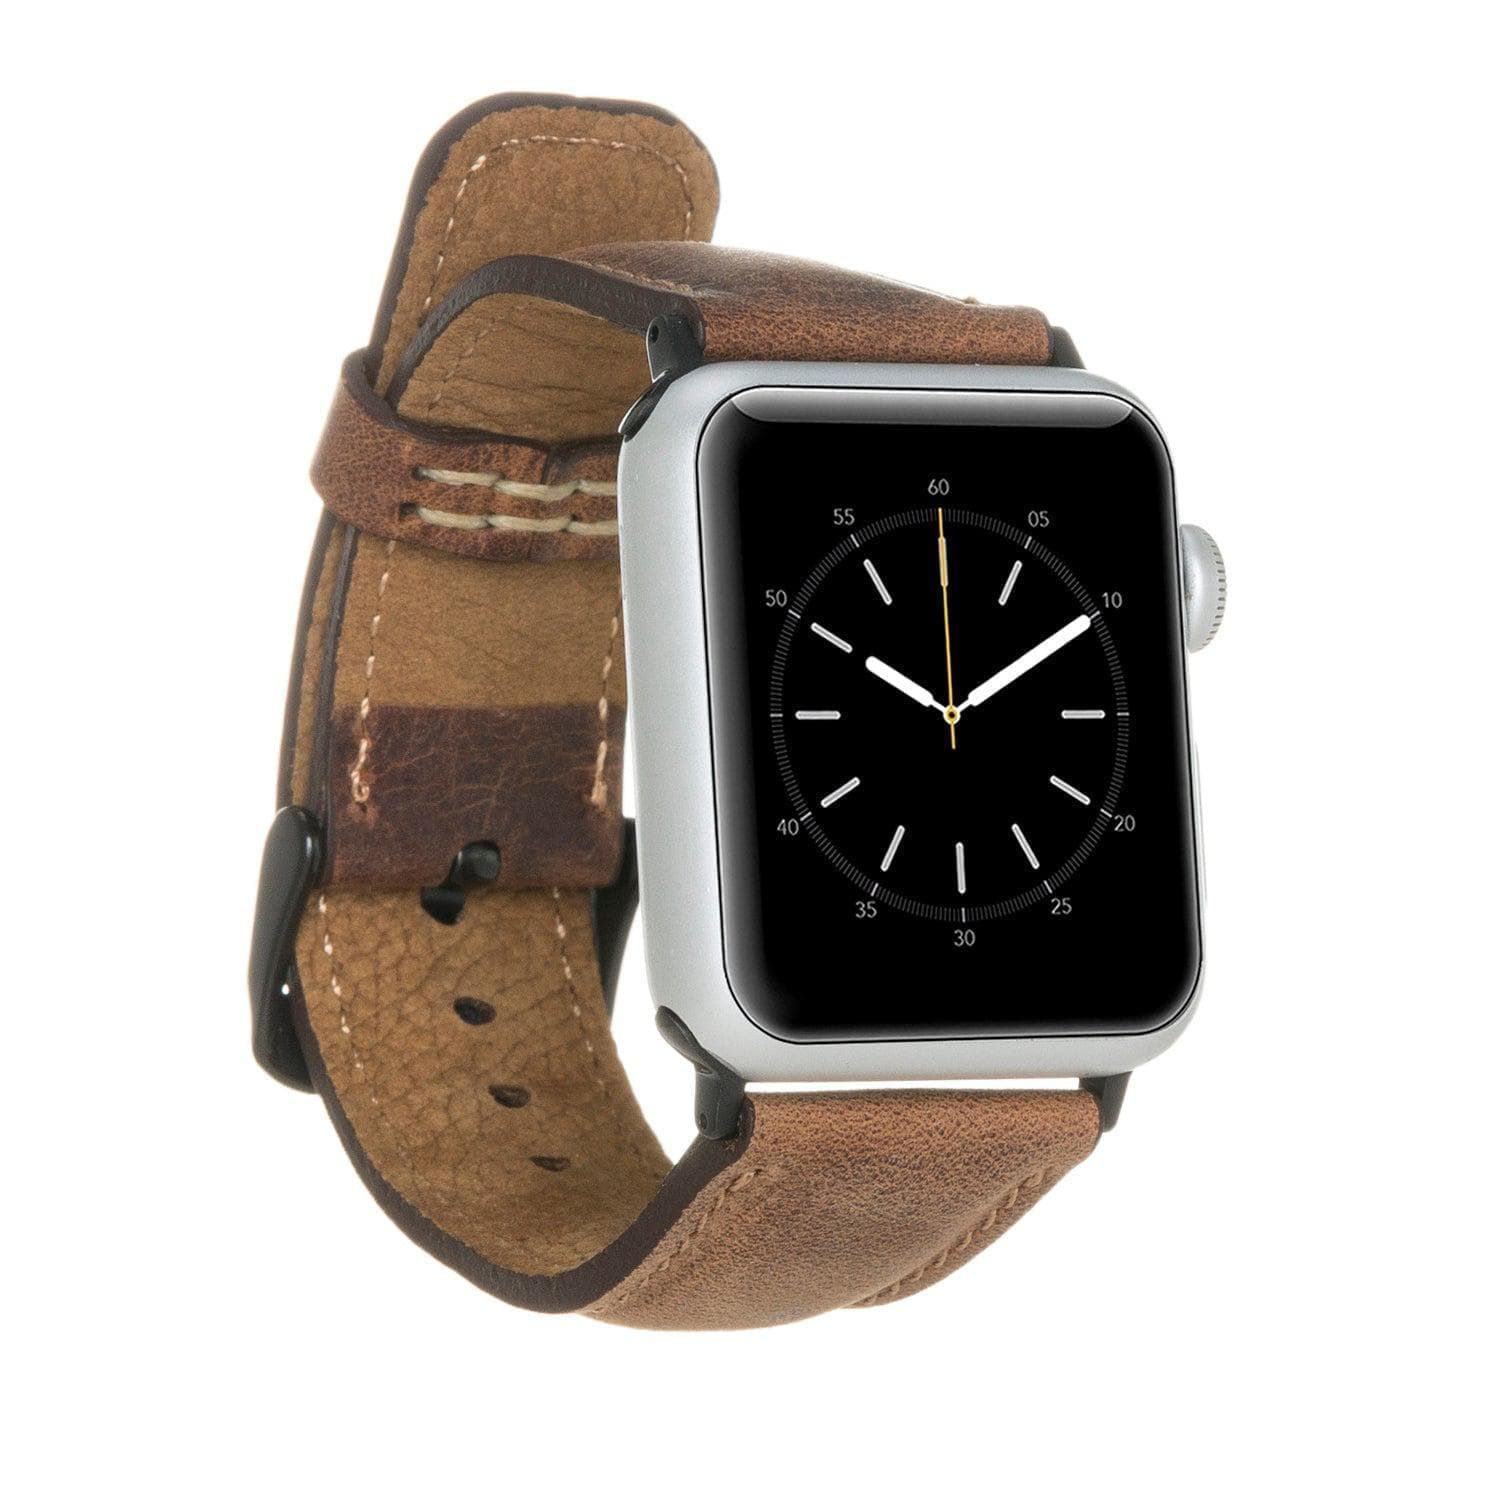 Exeter Classic Apple Watch Leather Straps Dark Brown / Leather Bouletta LTD